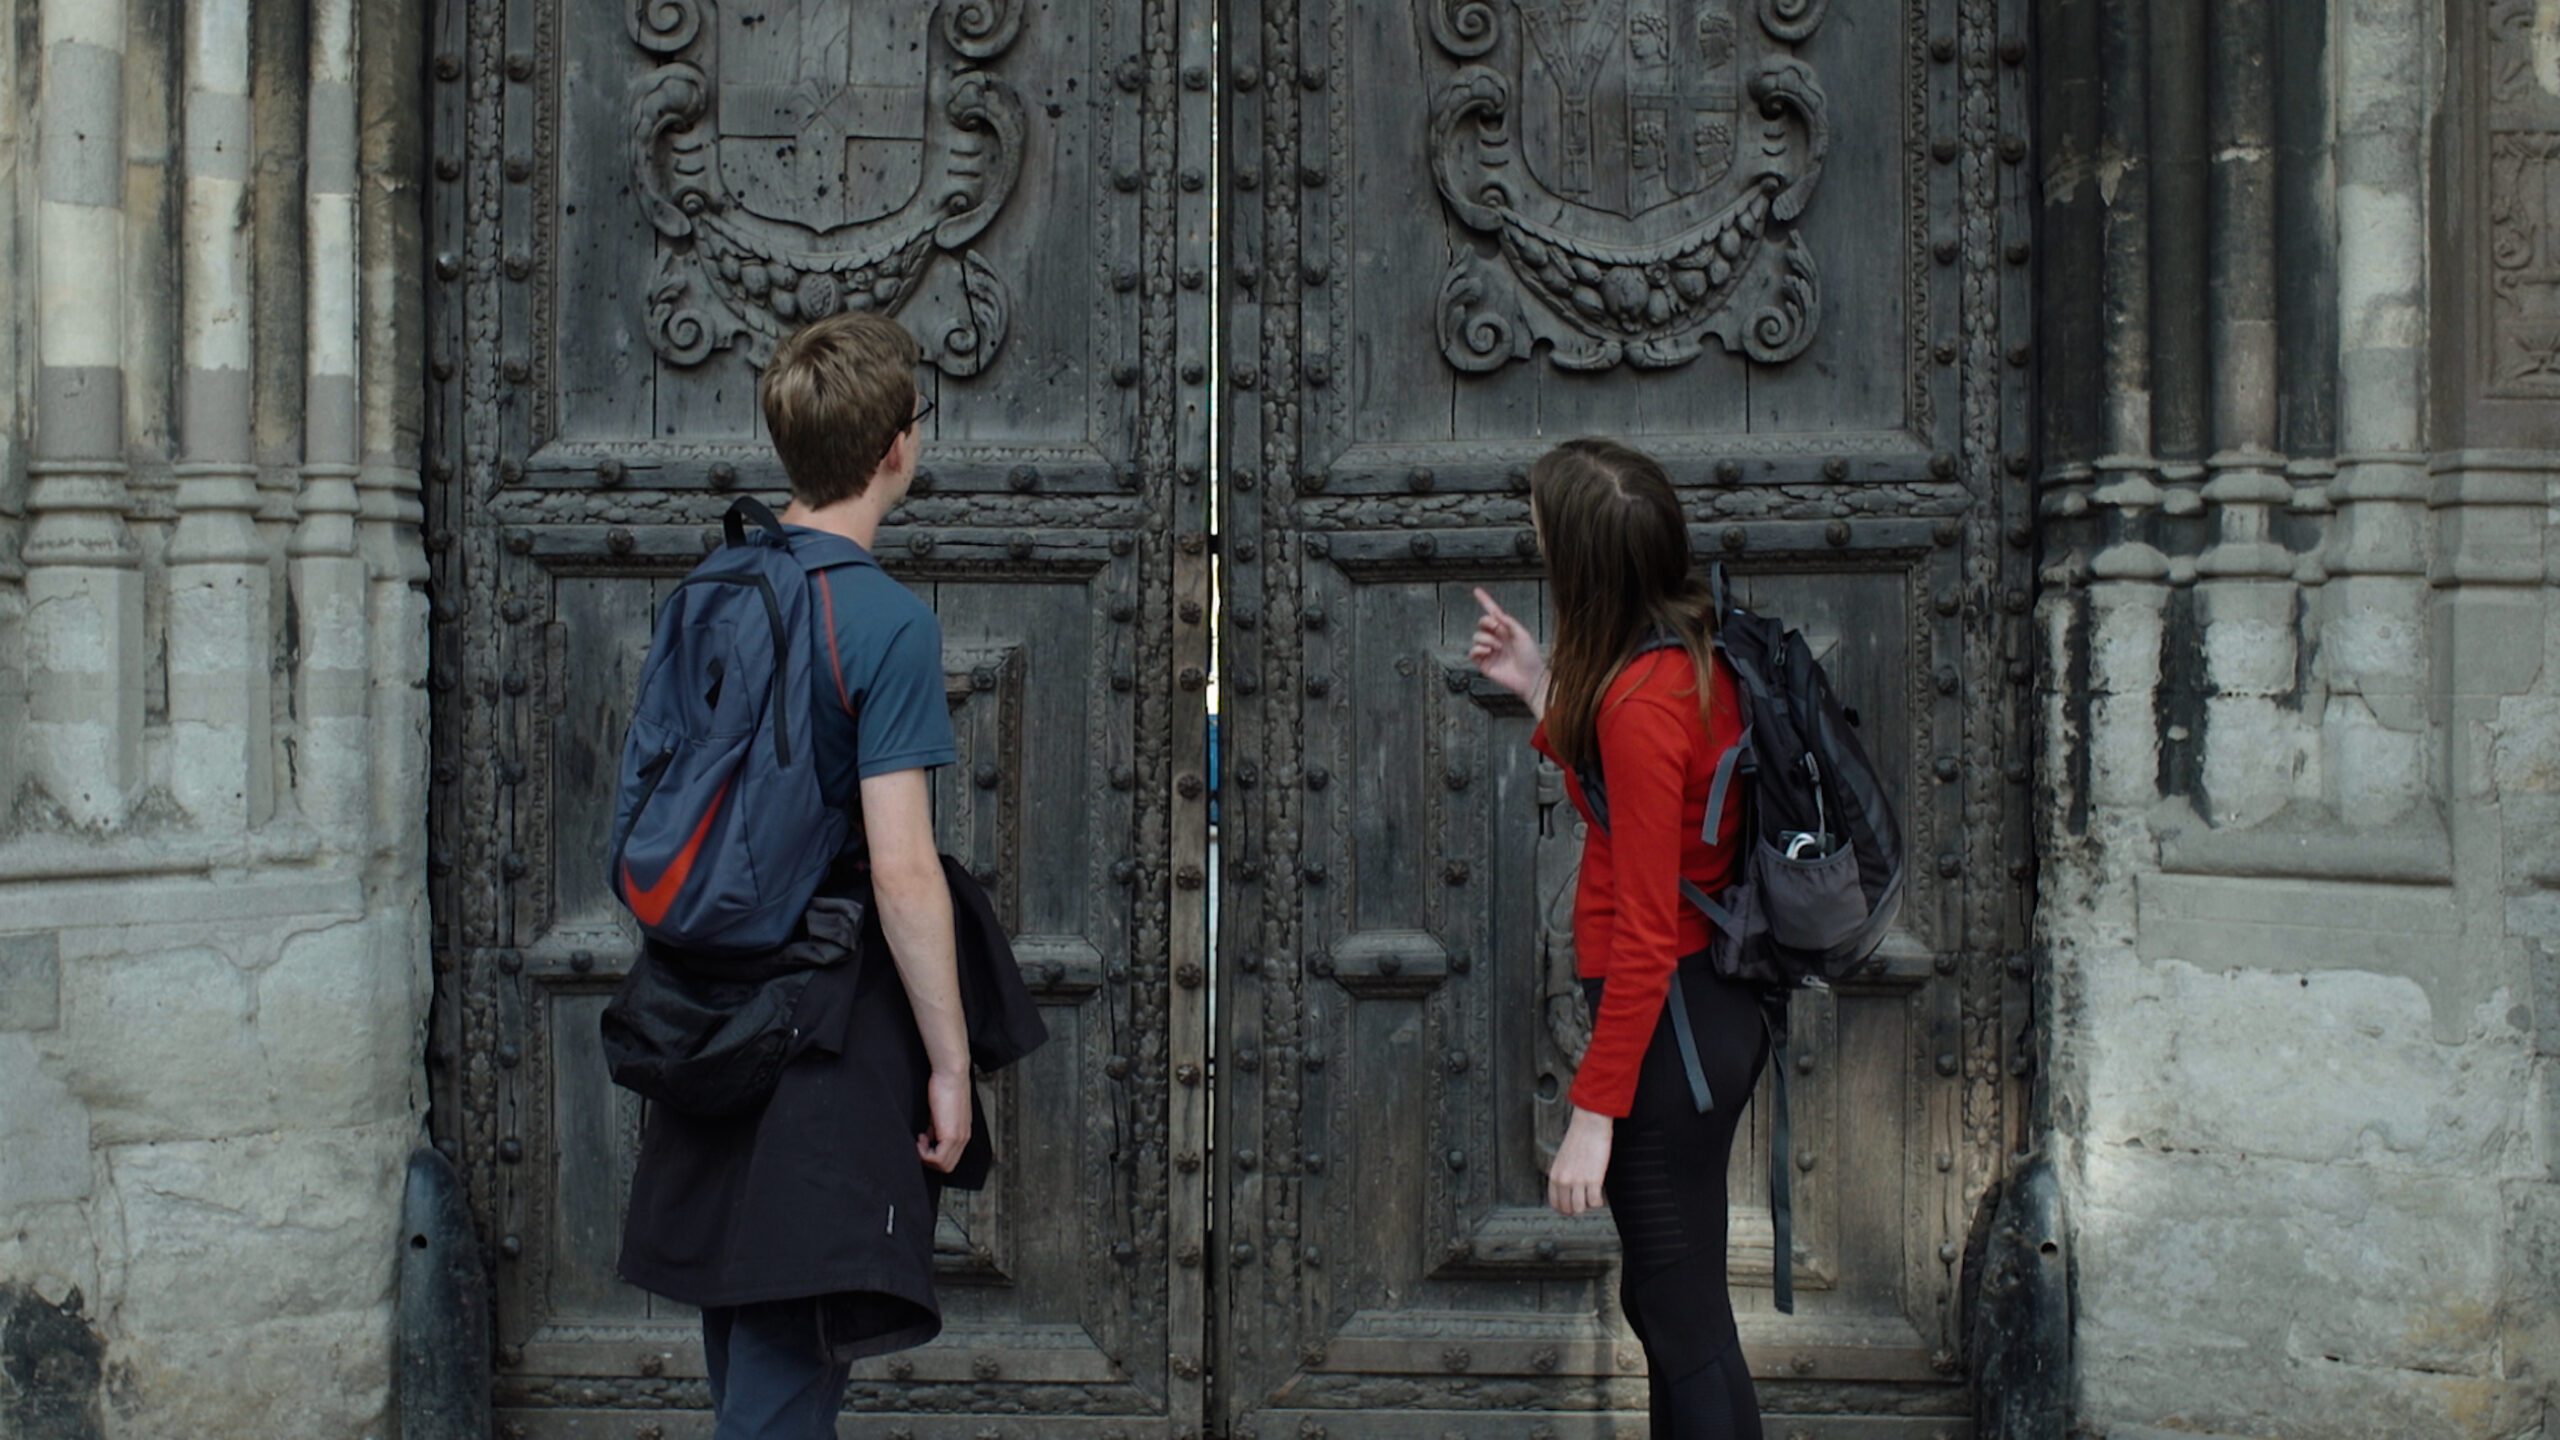 Two people at Canterbury Cathedral door. Big wooden doors with scrolls on.